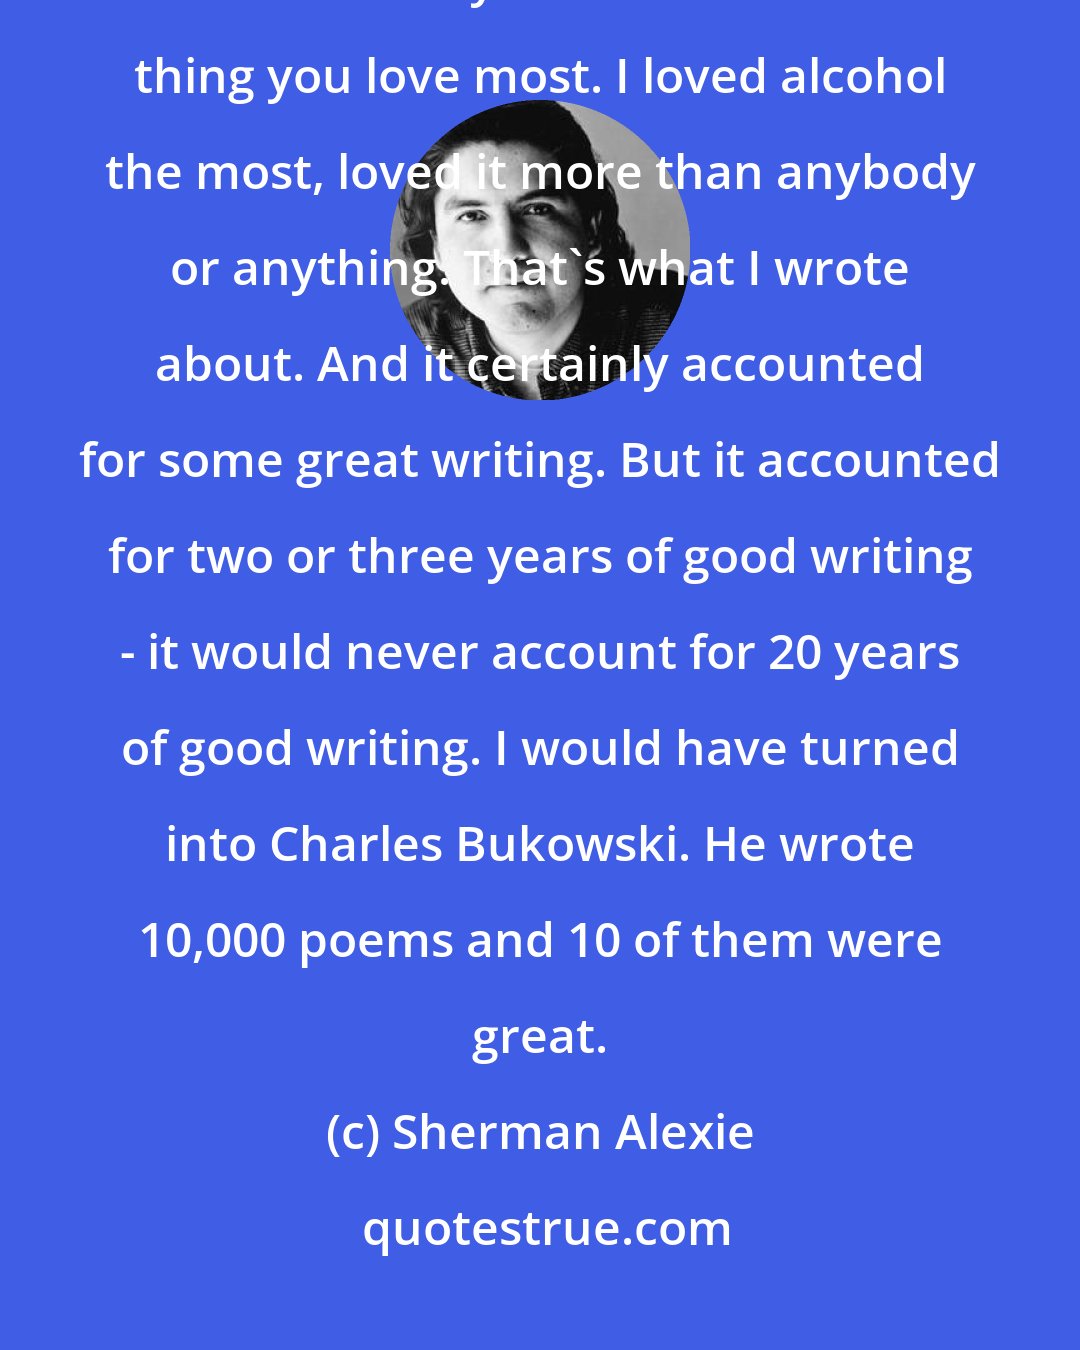 Sherman Alexie: I write less about alcohol, less and less and less. You 're an addict - so of course you write about the thing you love most. I loved alcohol the most, loved it more than anybody or anything. That's what I wrote about. And it certainly accounted for some great writing. But it accounted for two or three years of good writing - it would never account for 20 years of good writing. I would have turned into Charles Bukowski. He wrote 10,000 poems and 10 of them were great.